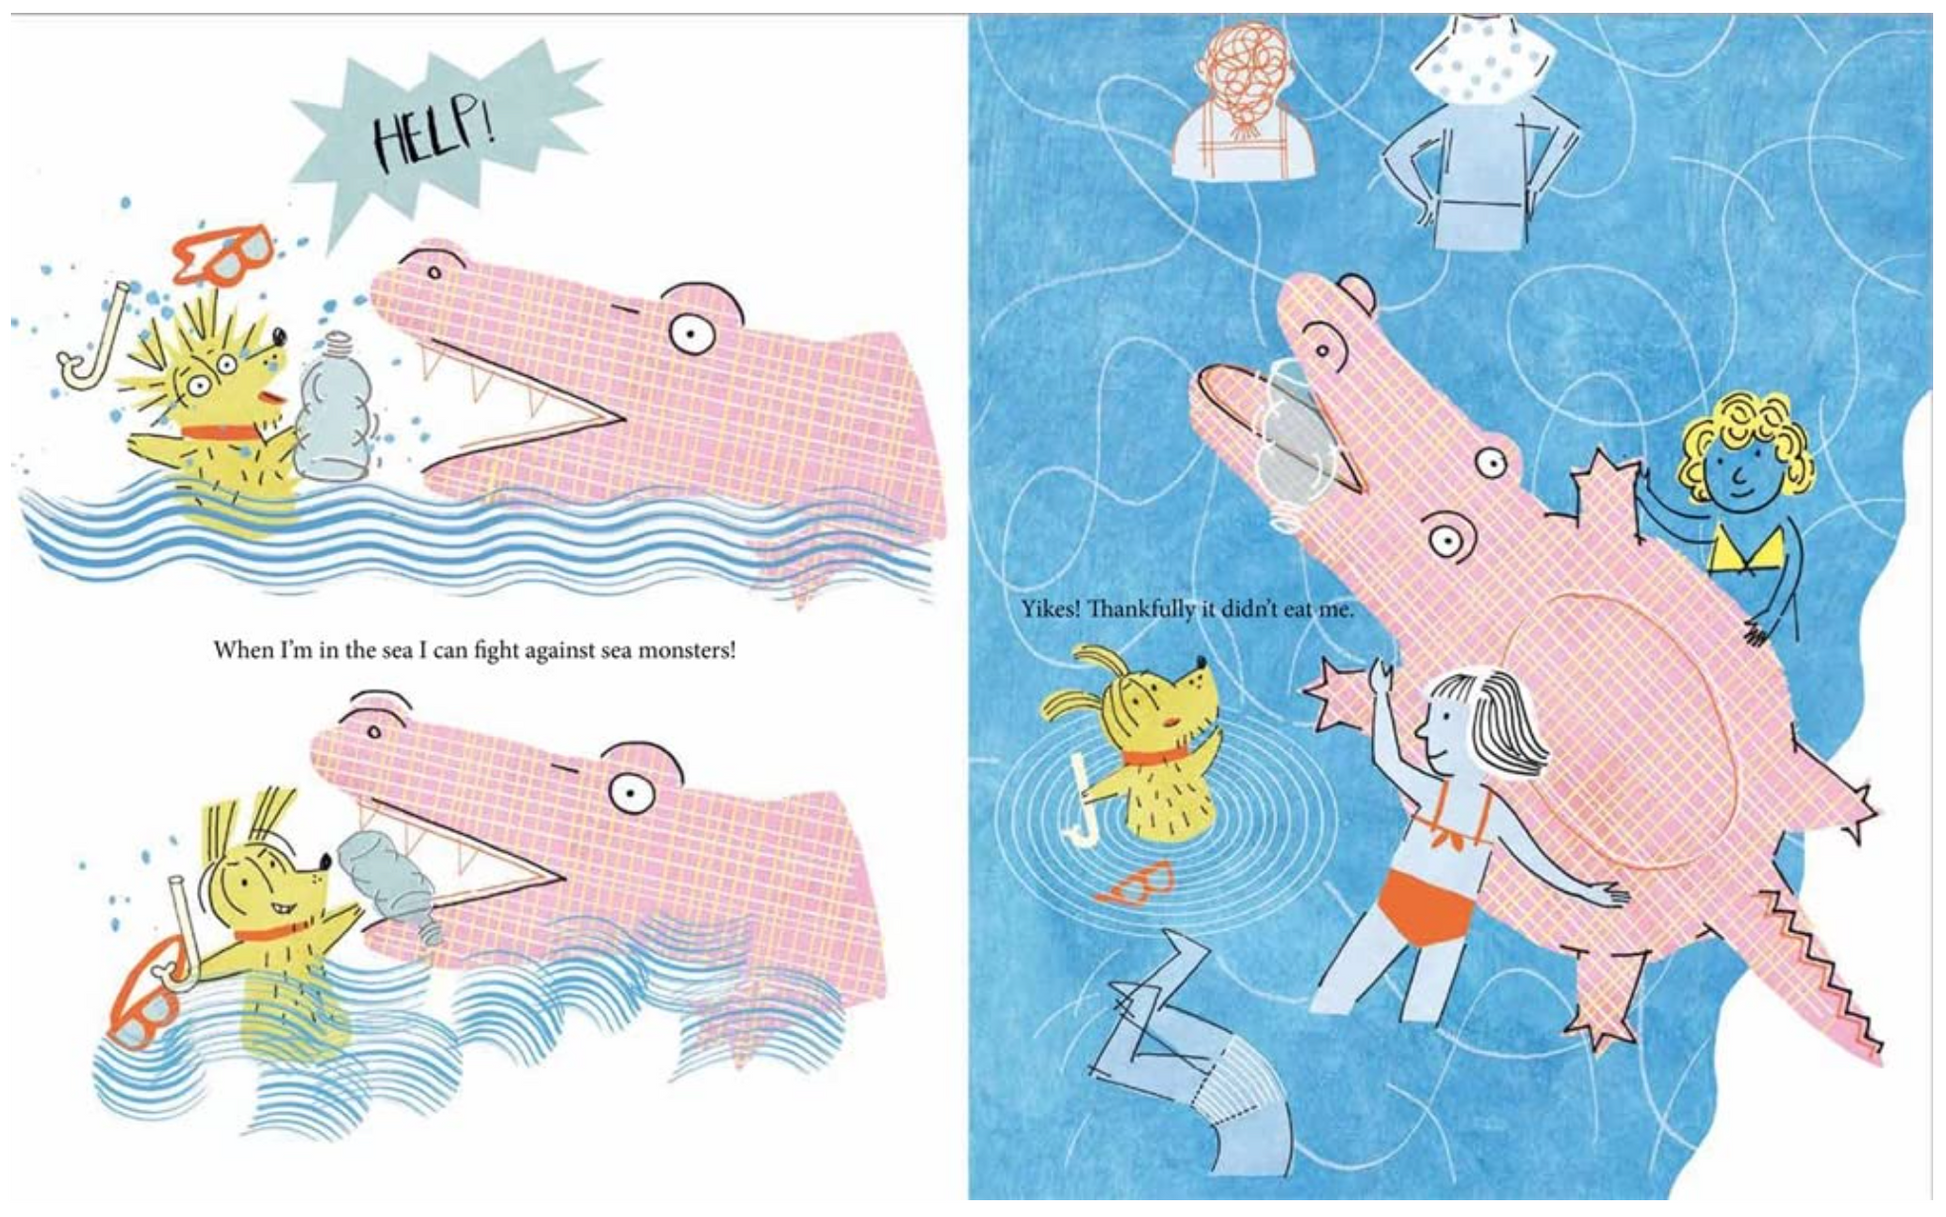 Inside page from ‘A Day by the Sea’ featuring textured illustration of a dog and a pink alligator 